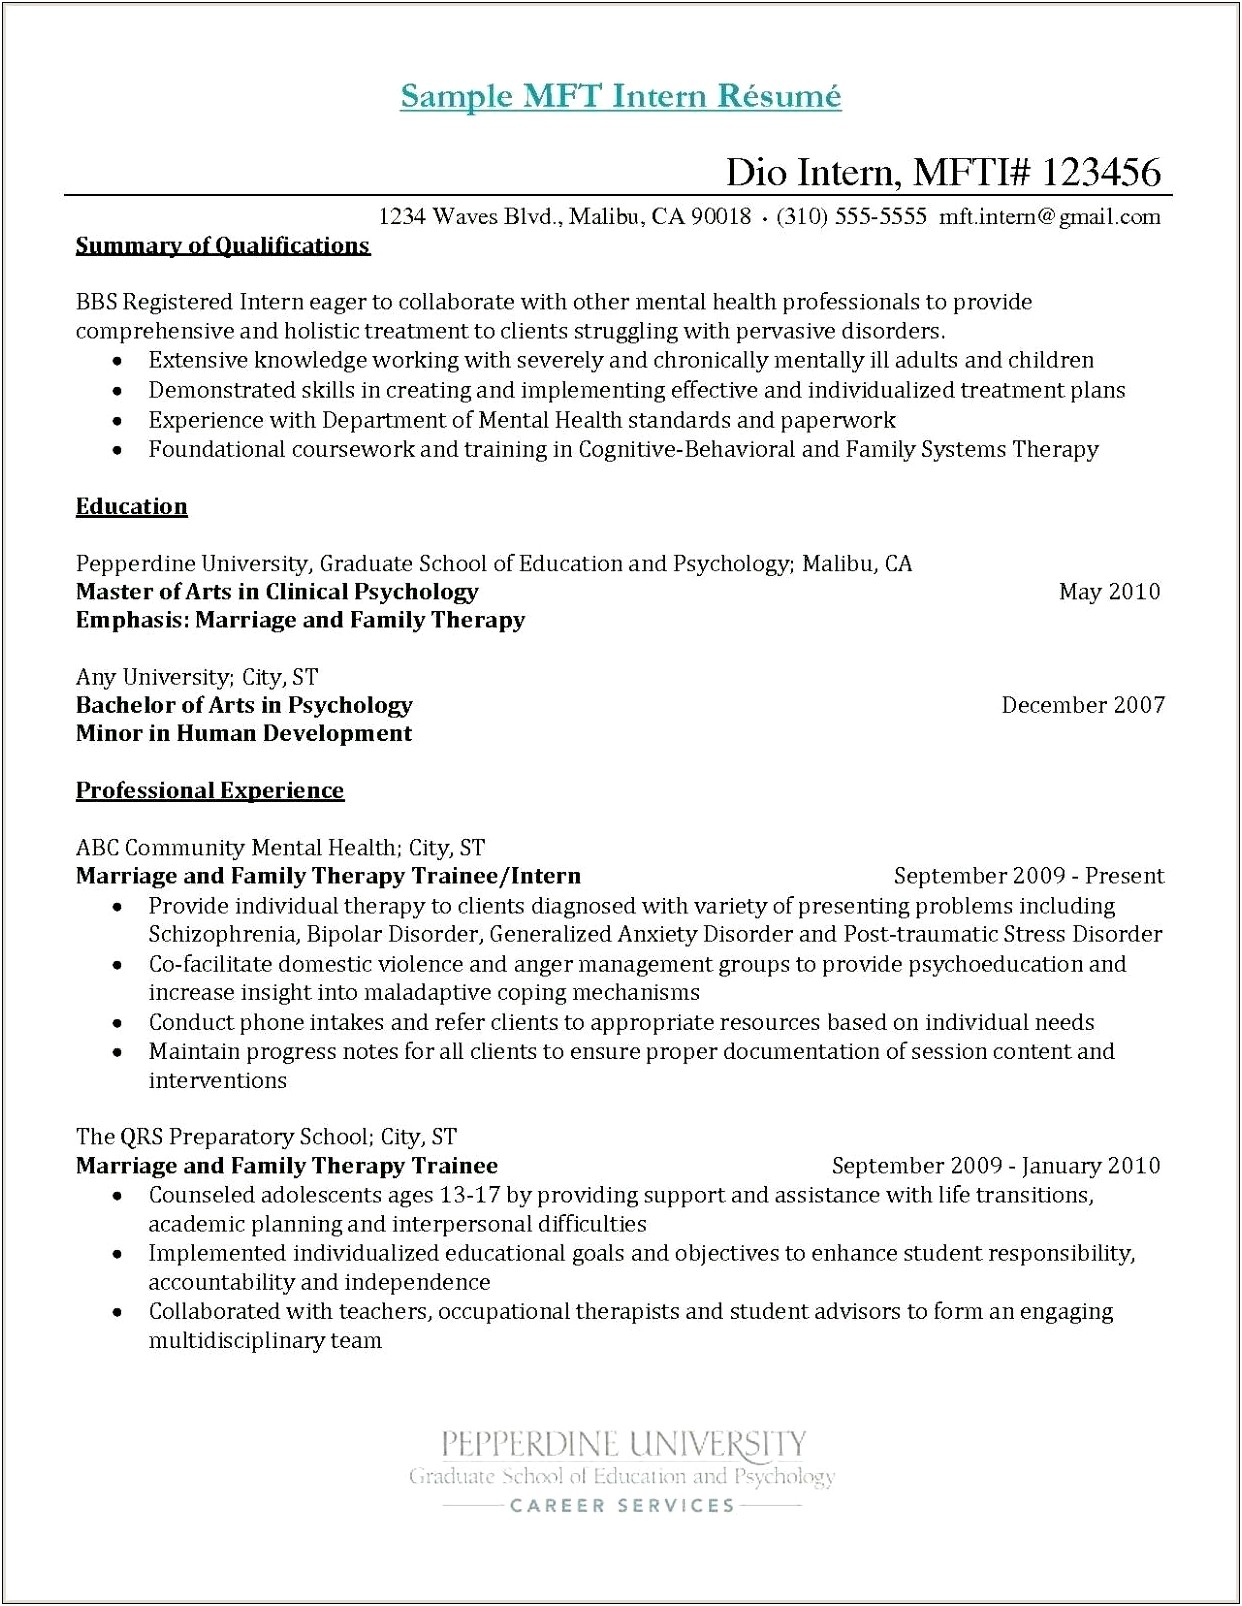 Professional Resume For Marriage And Family Therapist Template